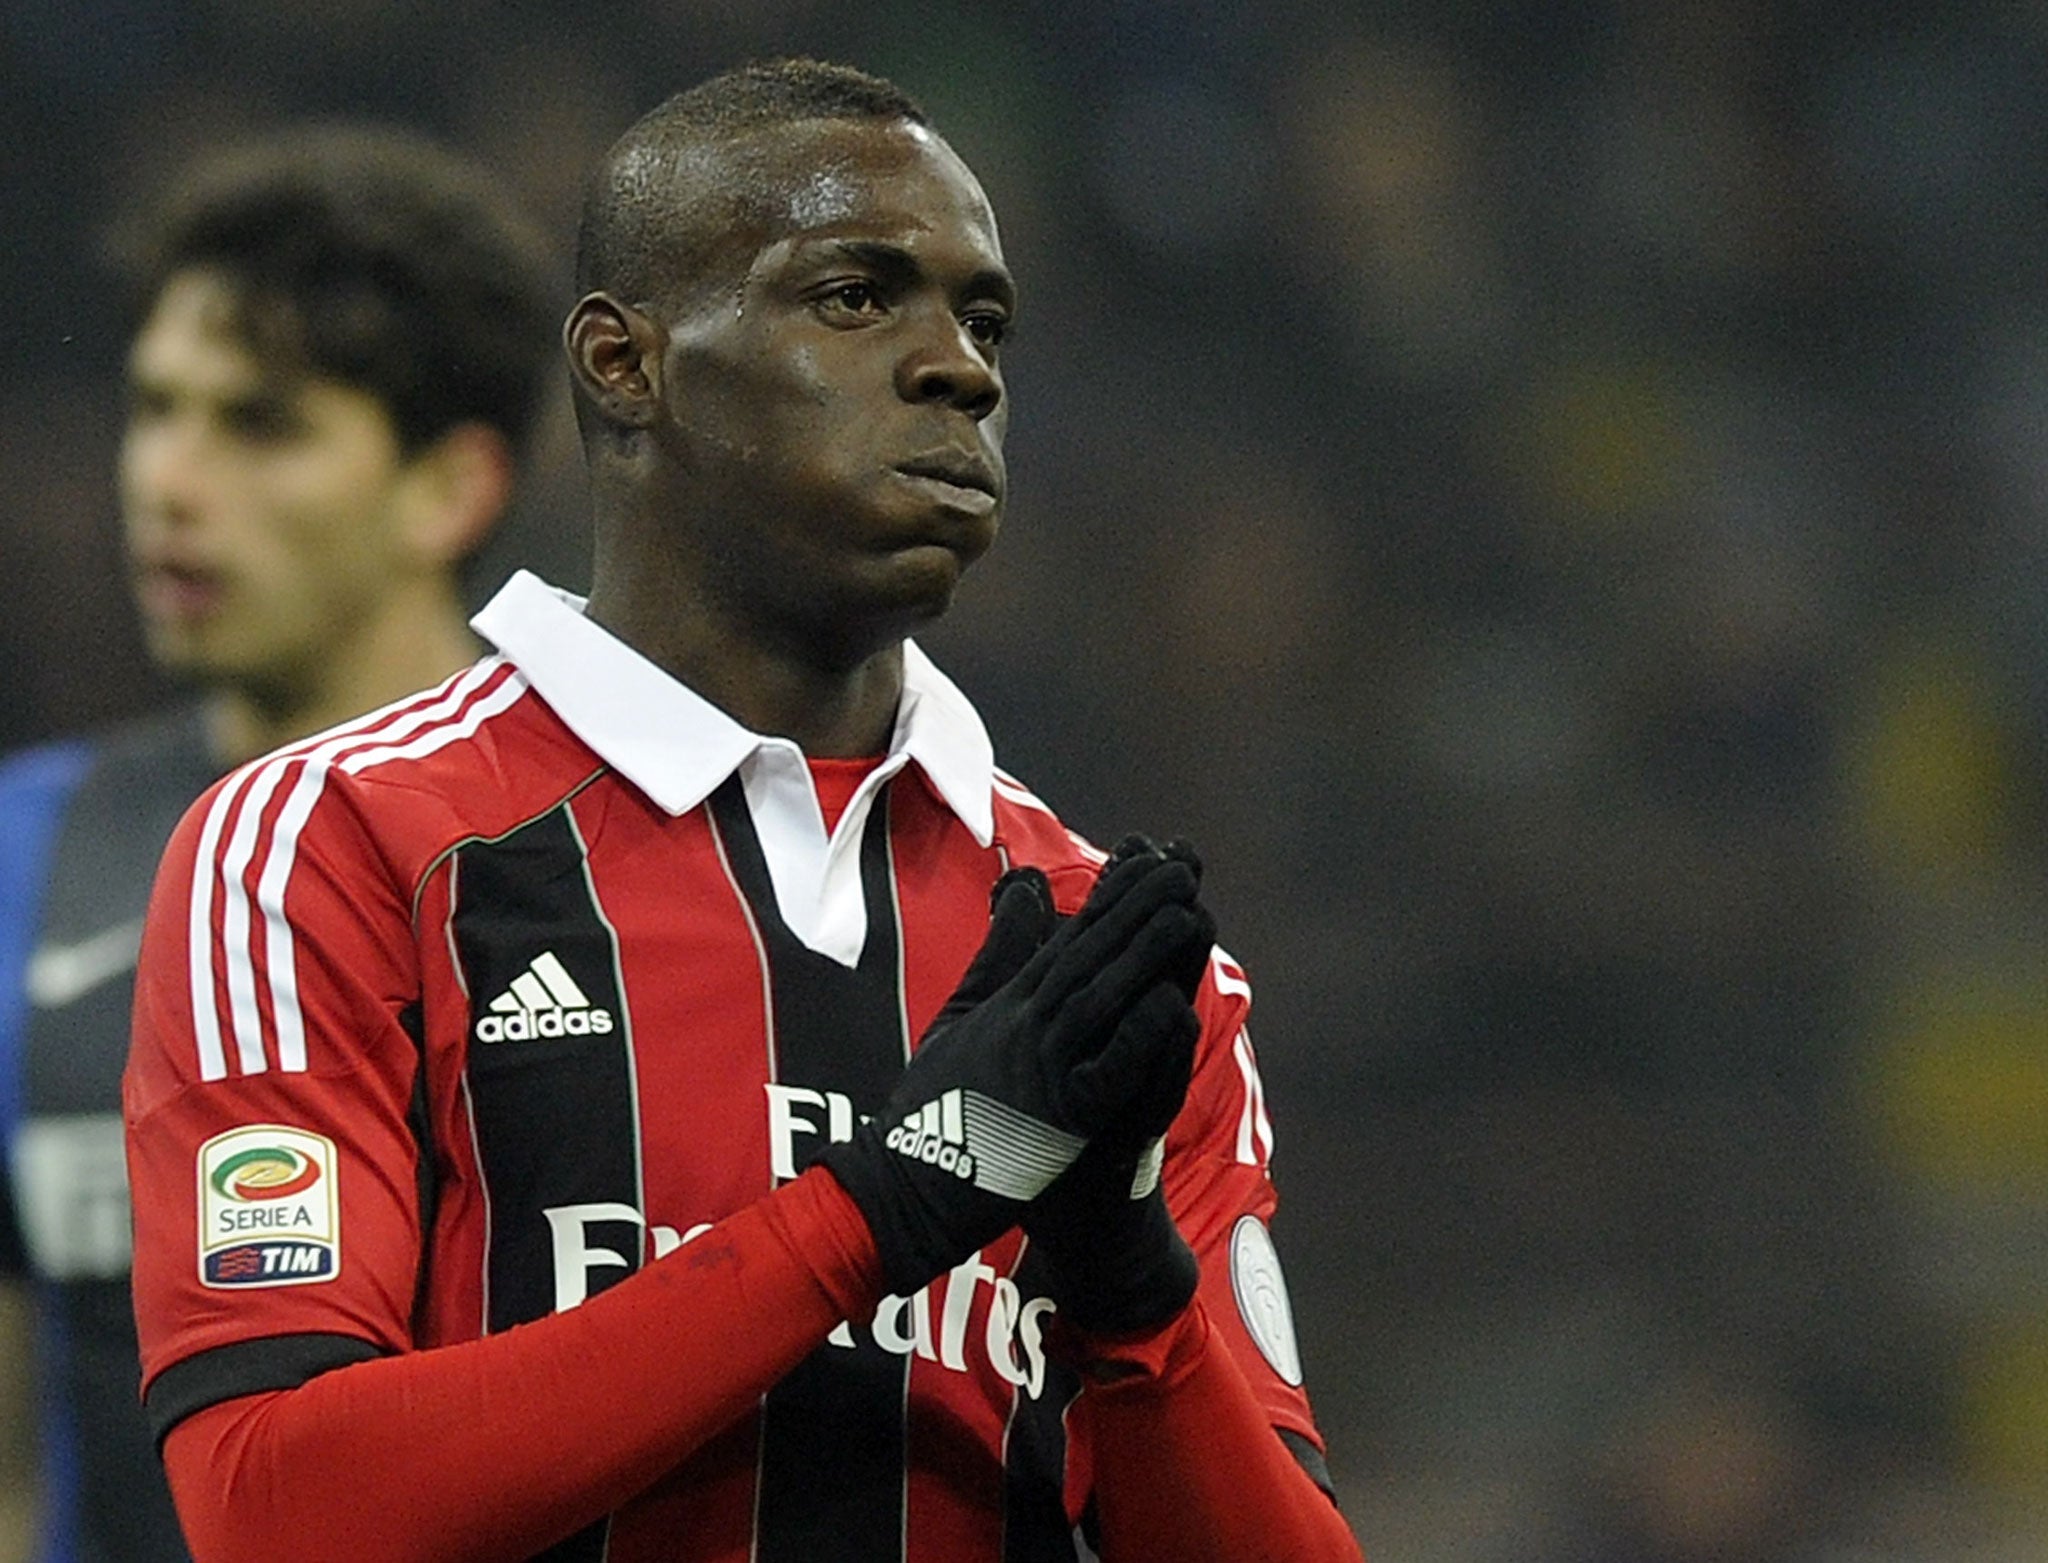 AC Milan's Mario Balotelli is reported to have suffered racist abuse from Inter fans